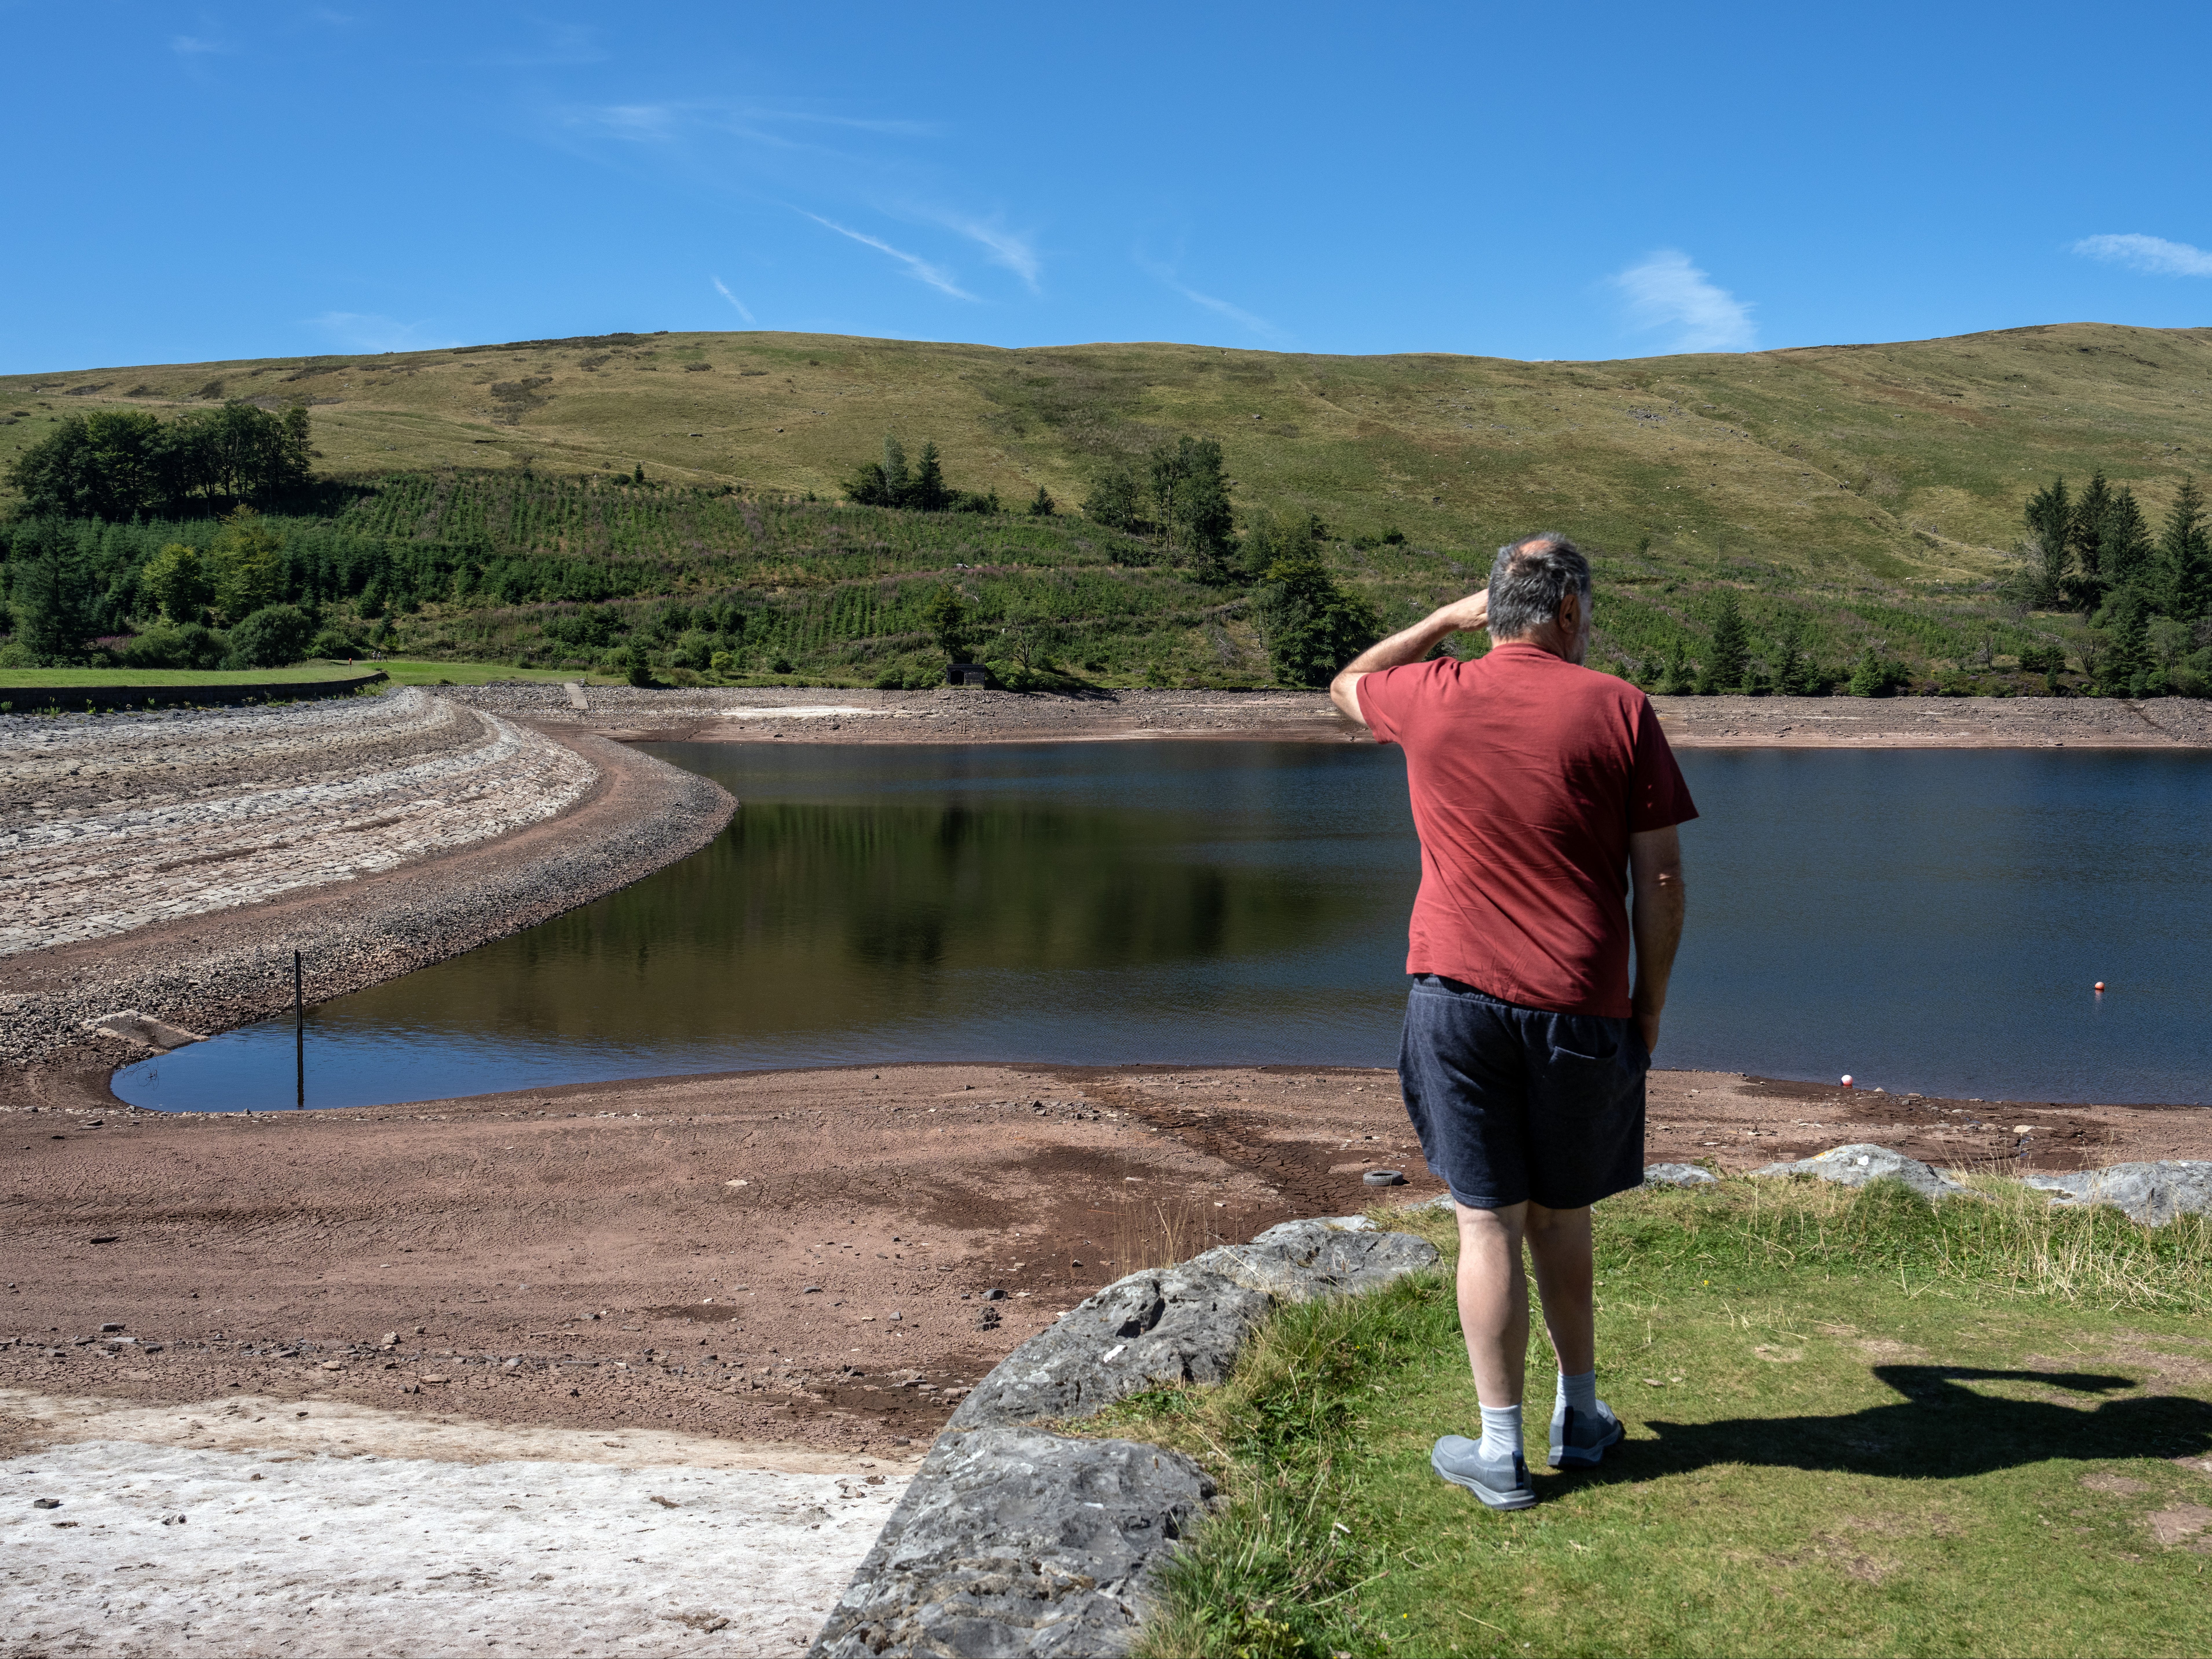 Water levels at the Beacons reservoir have also been affected by the dry and hot weather conditions